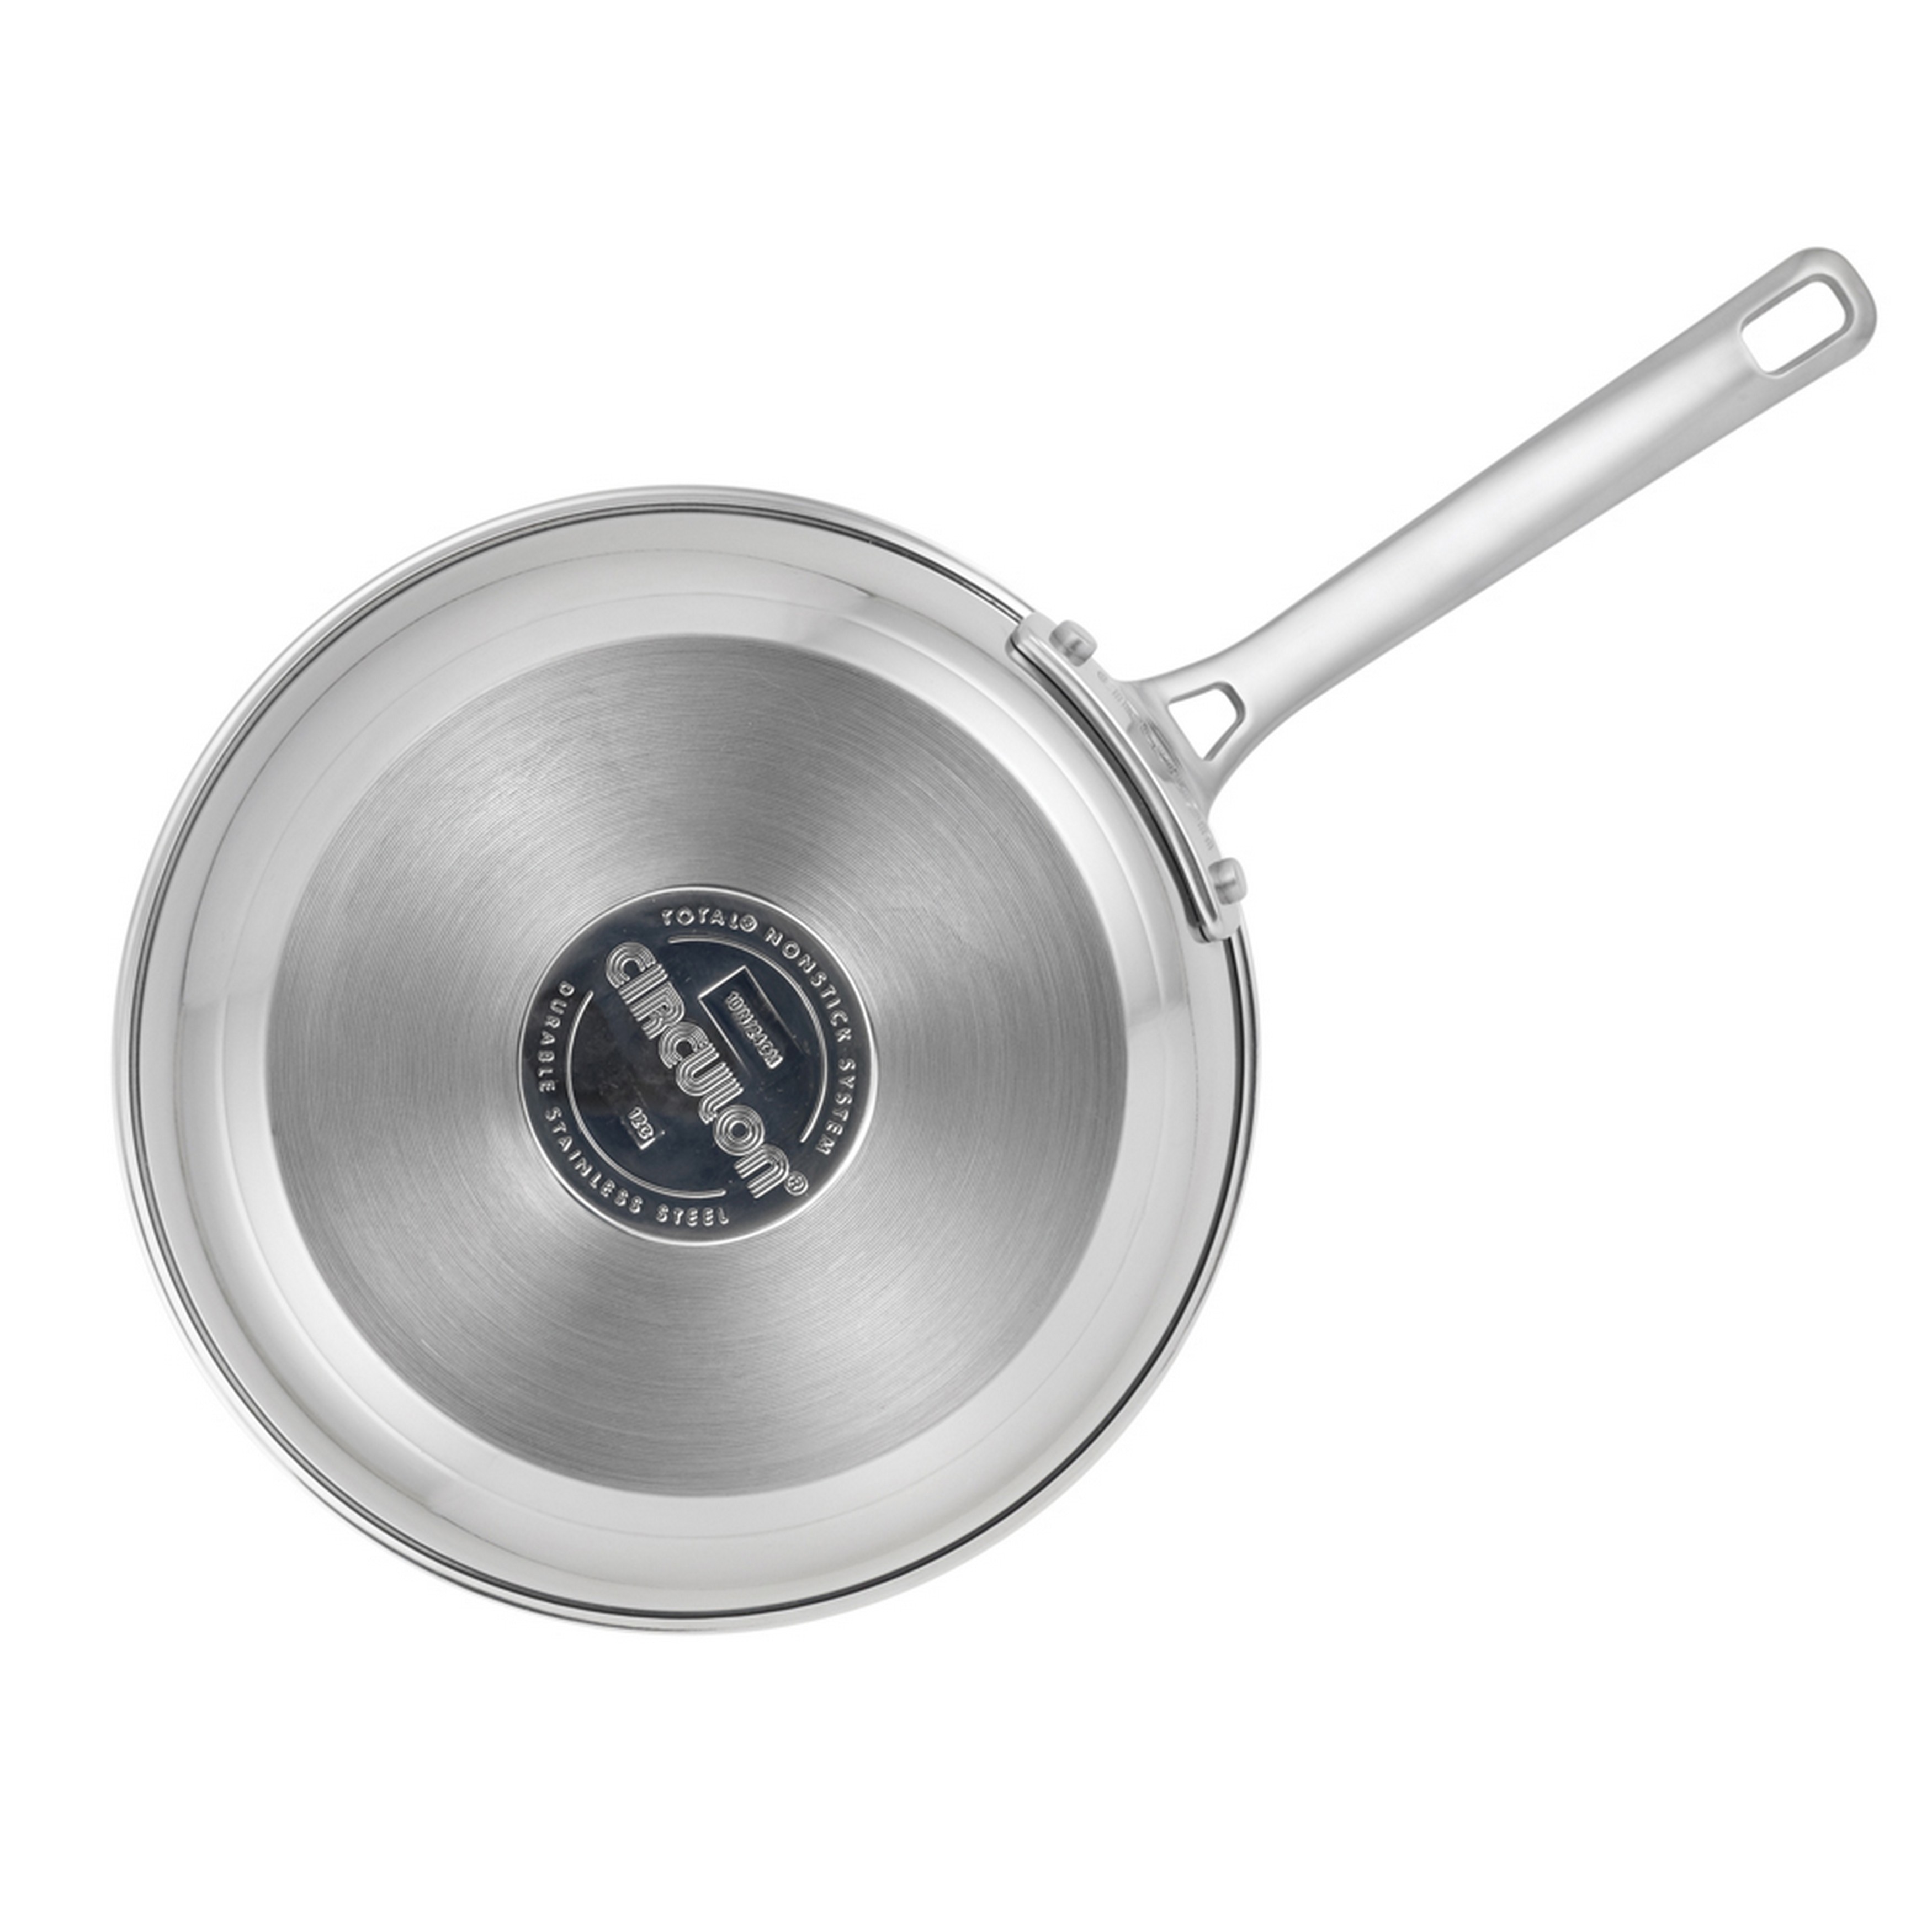 https://ak1.ostkcdn.com/images/products/9206674/Circulon-Genesis-Stainless-Steel-Nonstick-8.5-Inch-and-10-Inch-French-Skillets-3d8aff84-a5bf-4cb4-a9a0-9dfbb4a1fa02.jpg